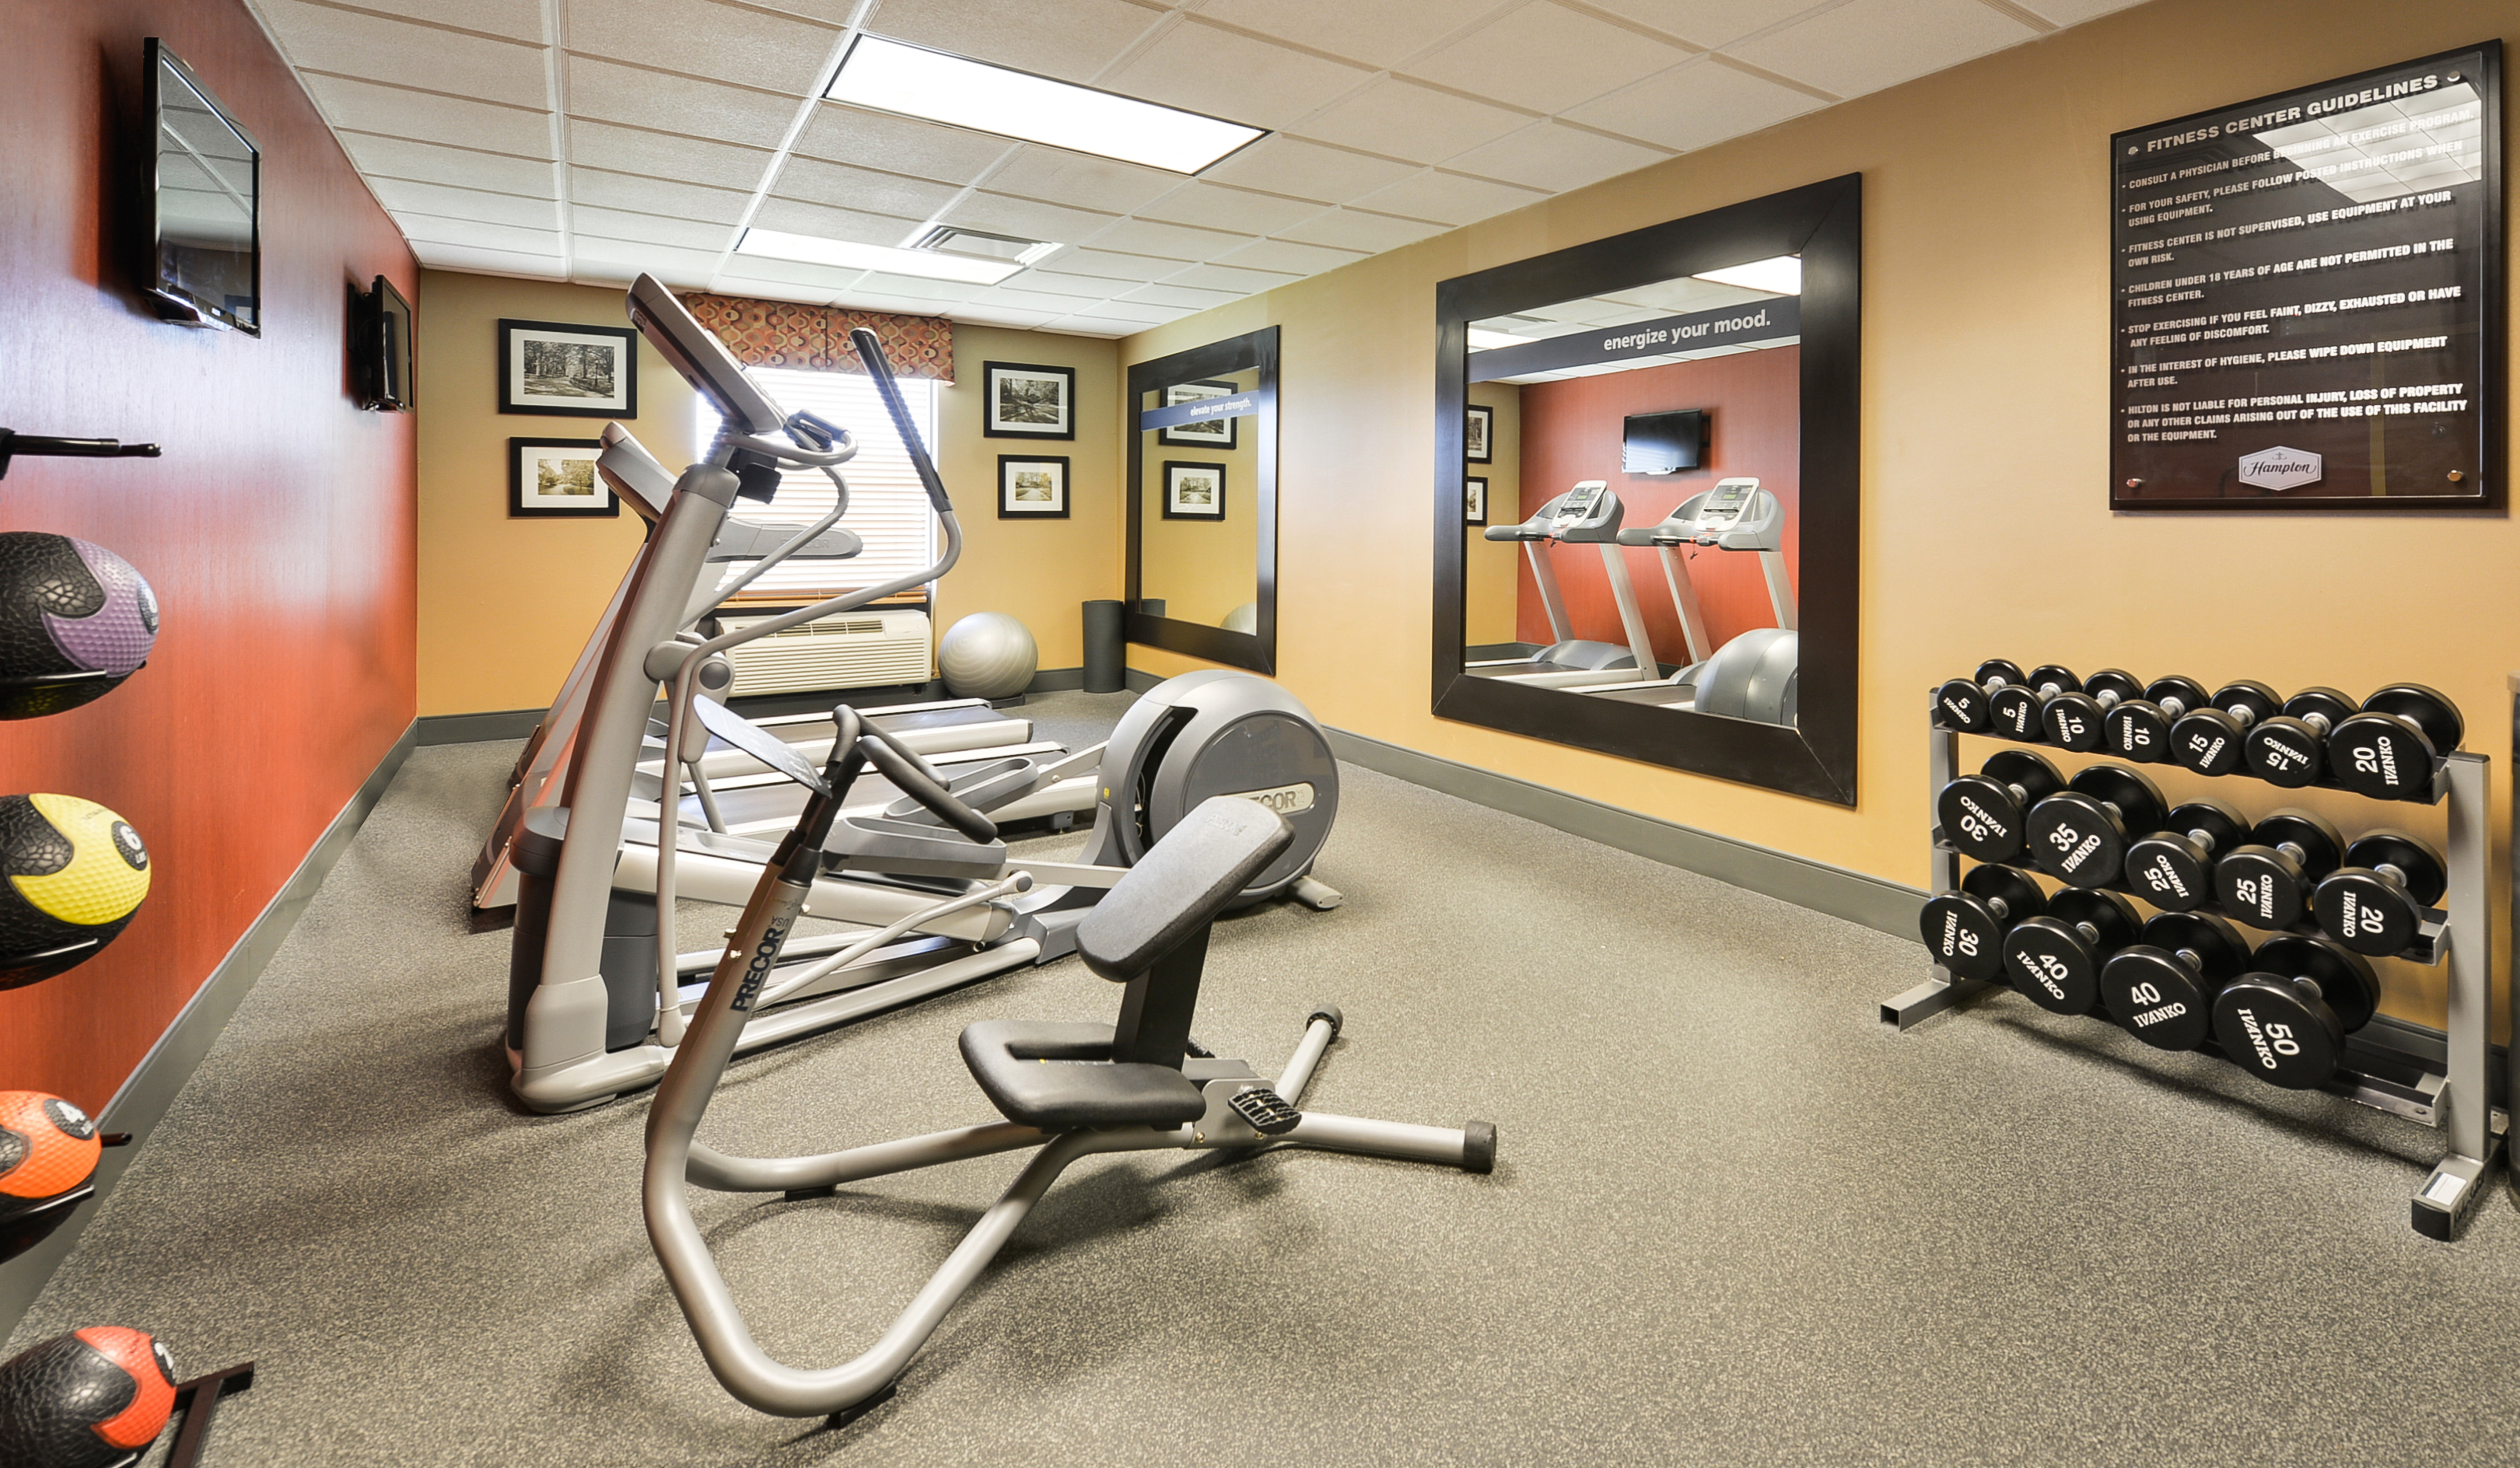 Fitness Center With Weight Balls, Cardio Equipment, TVs, Wall Art, Window, Two Wall Mirrors, and Free Weights